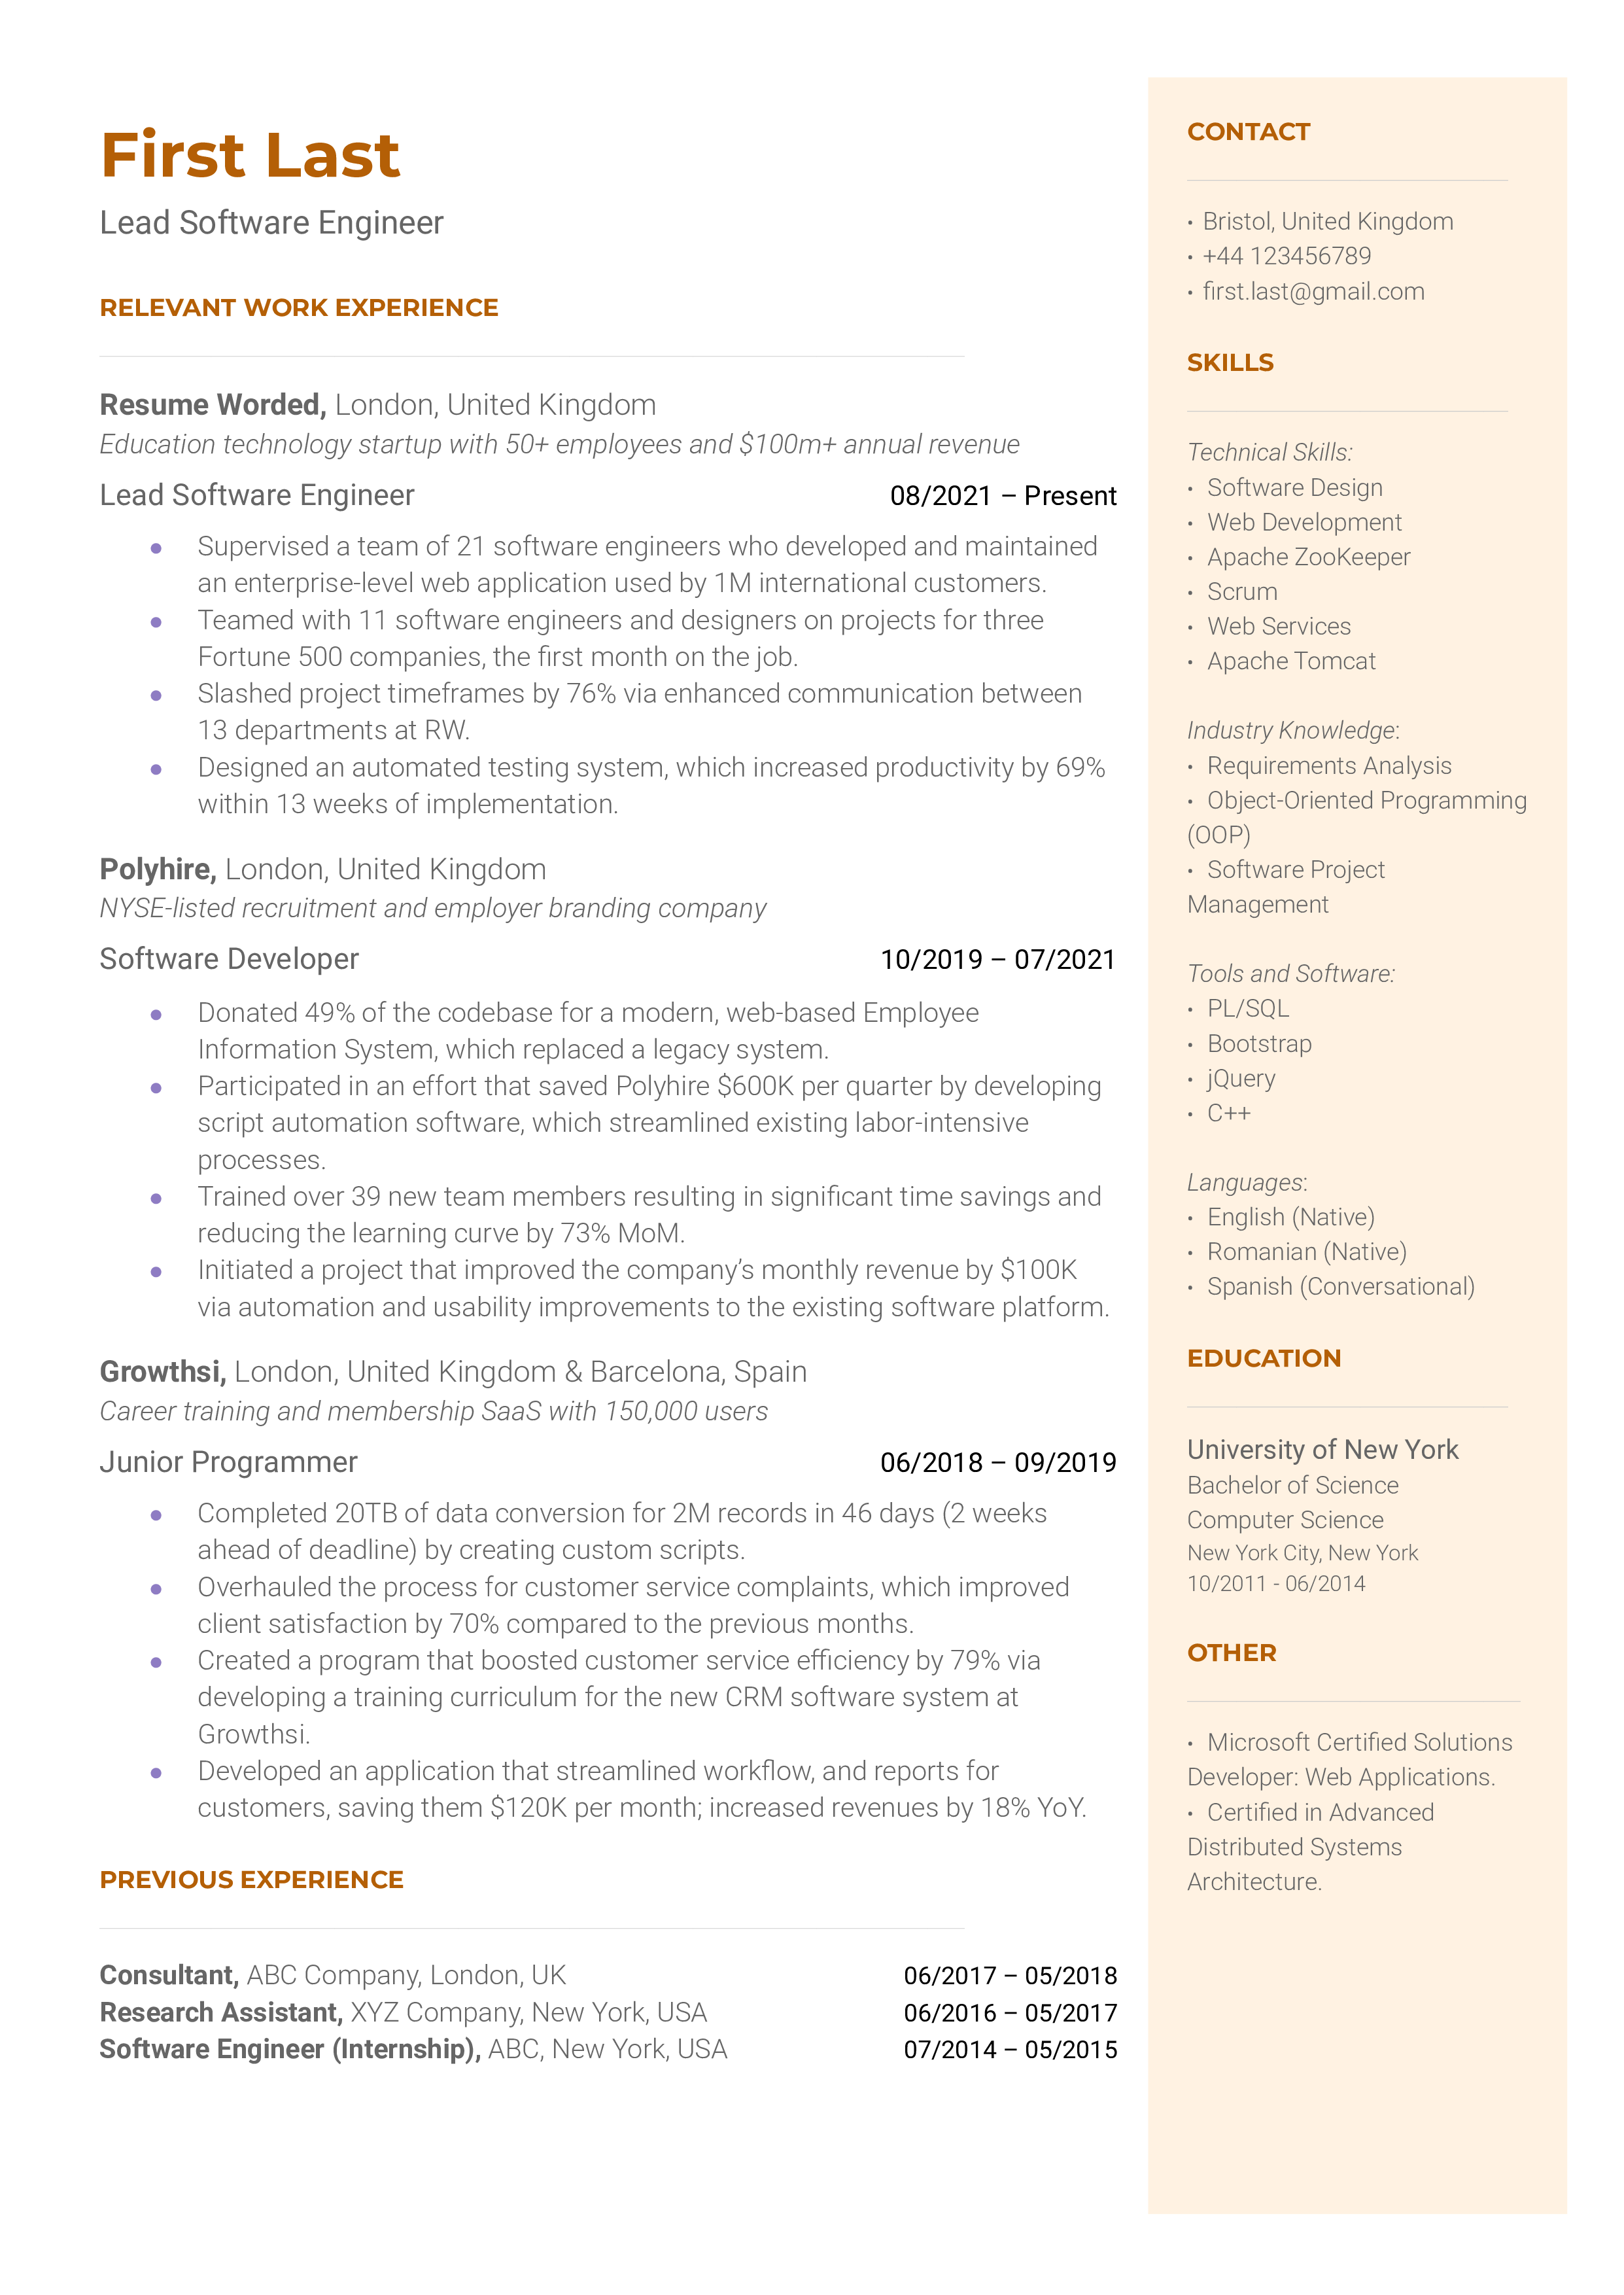 Screenshot of a CV for a Lead Software Engineer role.